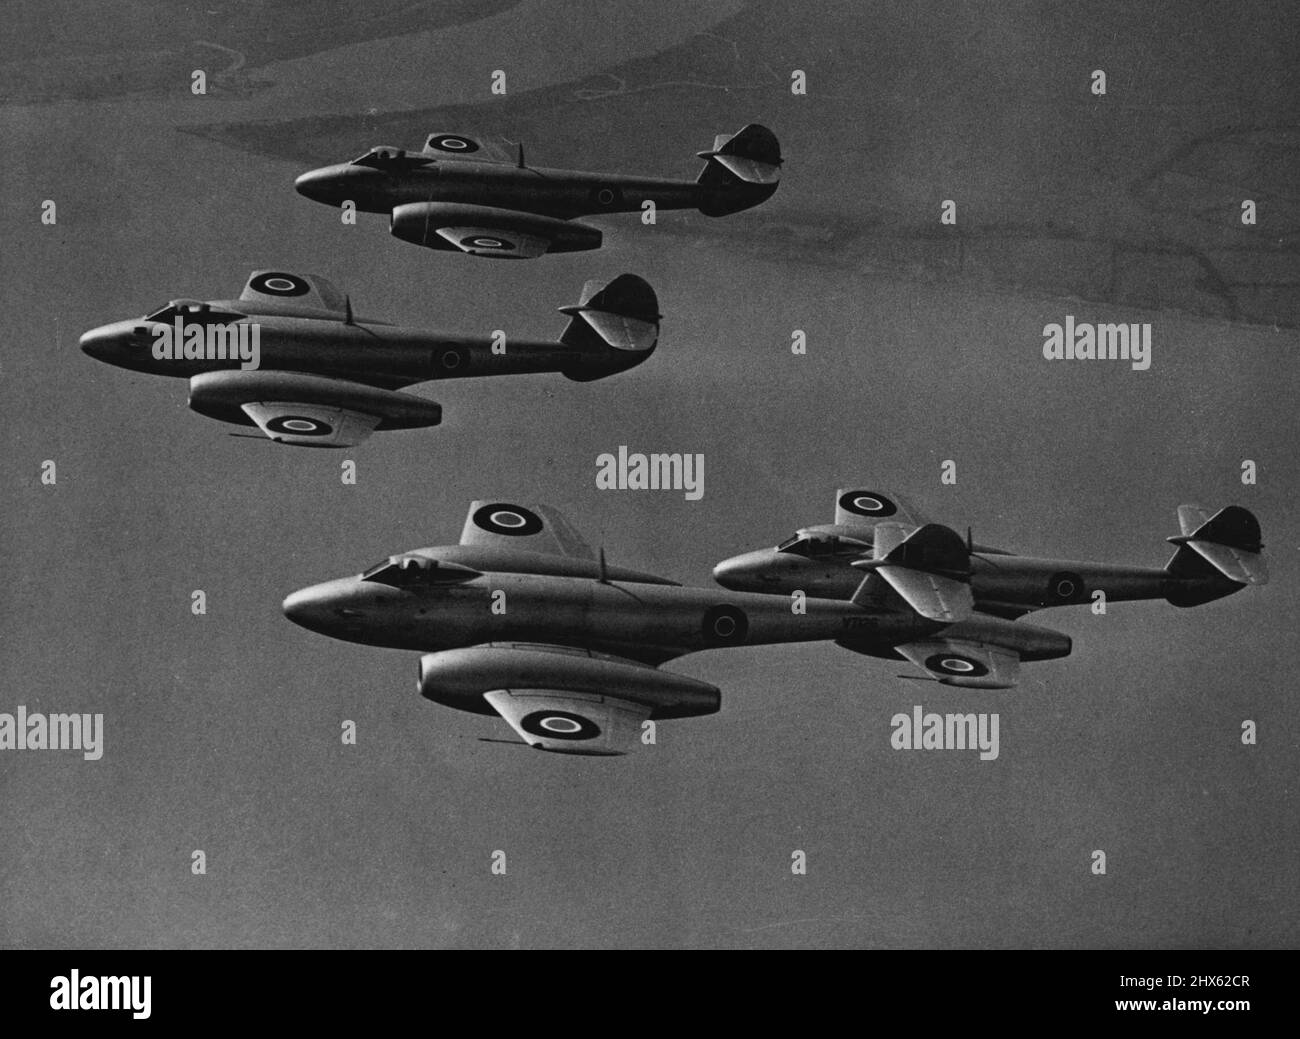 World's Fastest Fighter Group in the Air First photographs taken in the air of the ***** IV Meteor jet planes of the R.A.F. ***** group stationed at Horsham St. Faith, ***** Norwich, shows some of the planes on a training flight over the east coast of England. This group is equipped with the new mark IV Meteor jet planes which are fitted with the improved power units giving twice the power of the Meteor Mark III, and making them the fastest fighter group in operation in the world. April 28, 194 Stock Photo